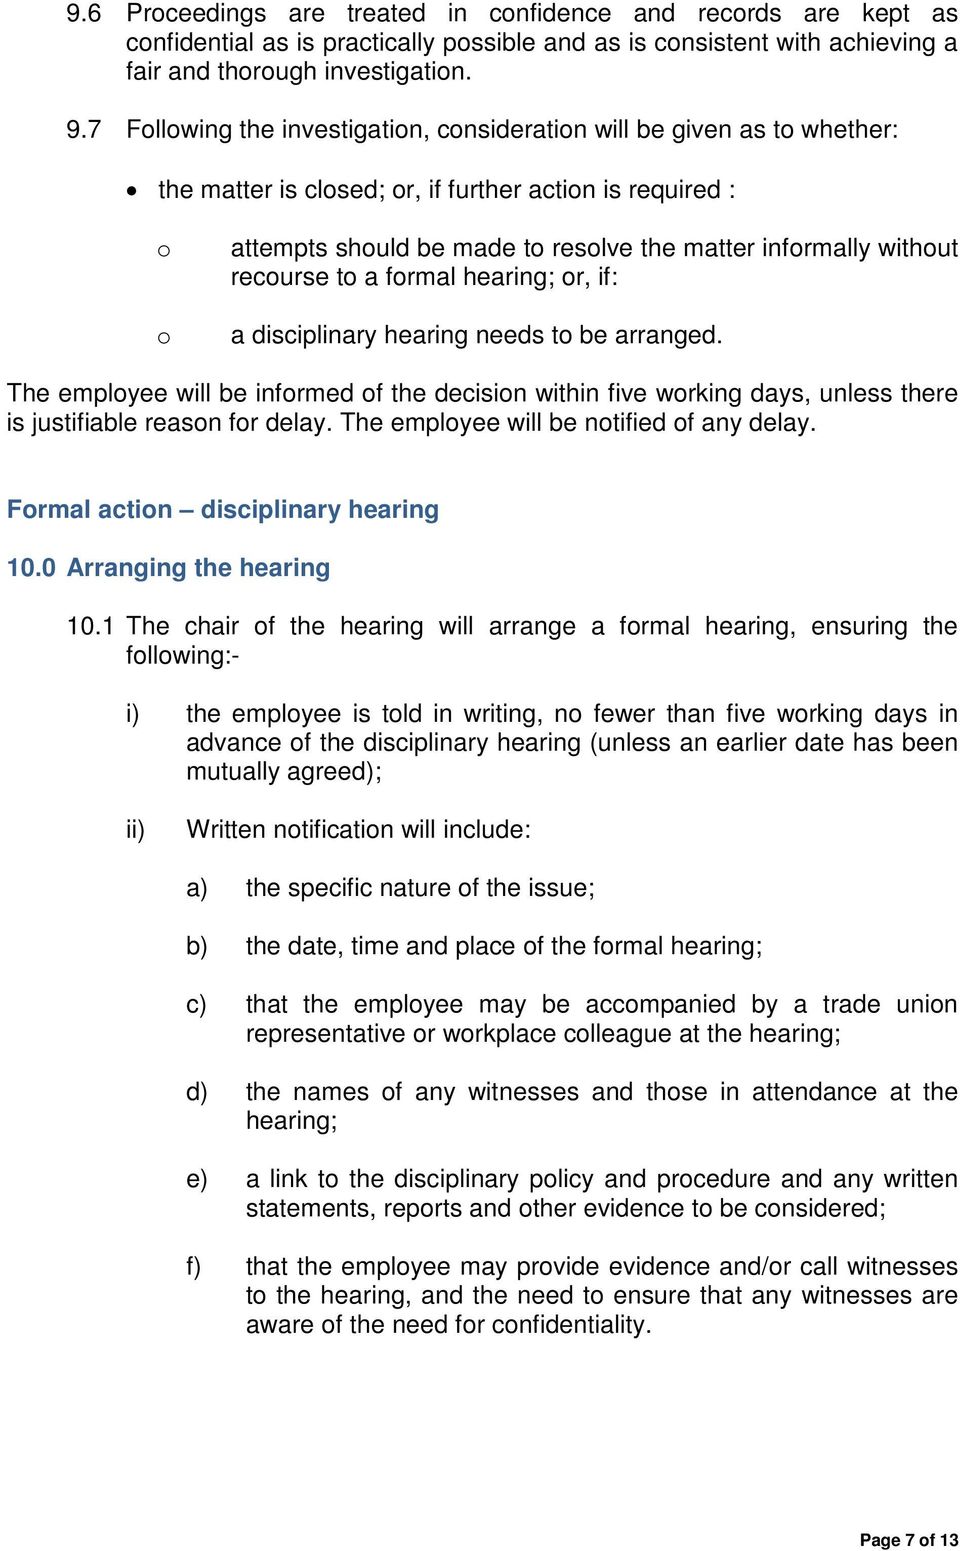 without recourse to a formal hearing; or, if: a disciplinary hearing needs to be arranged.